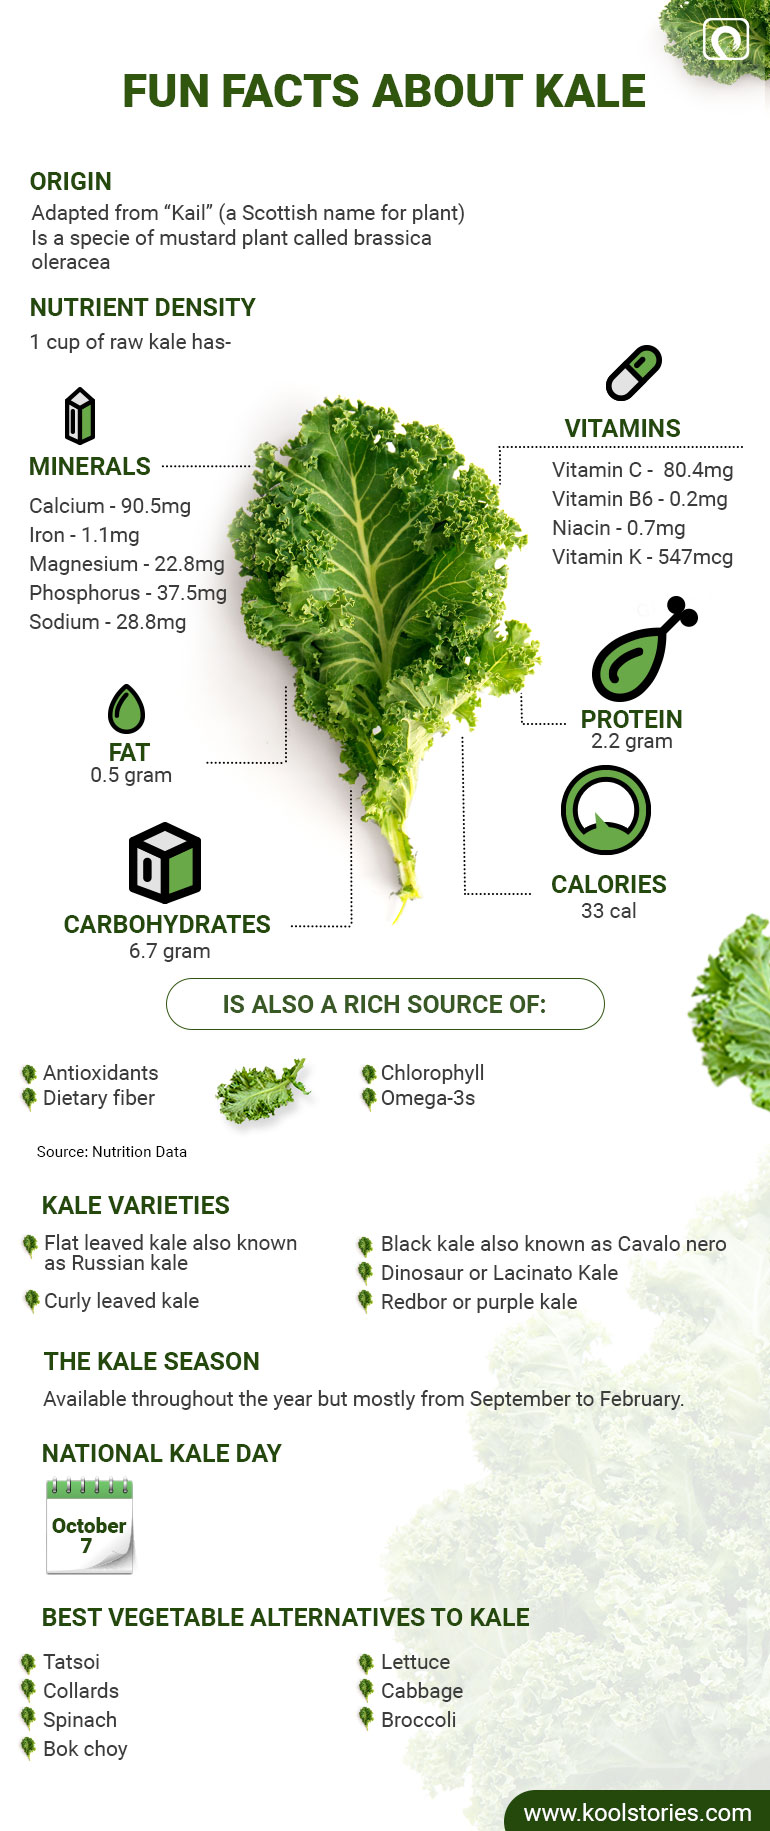 Fun facts about Kale